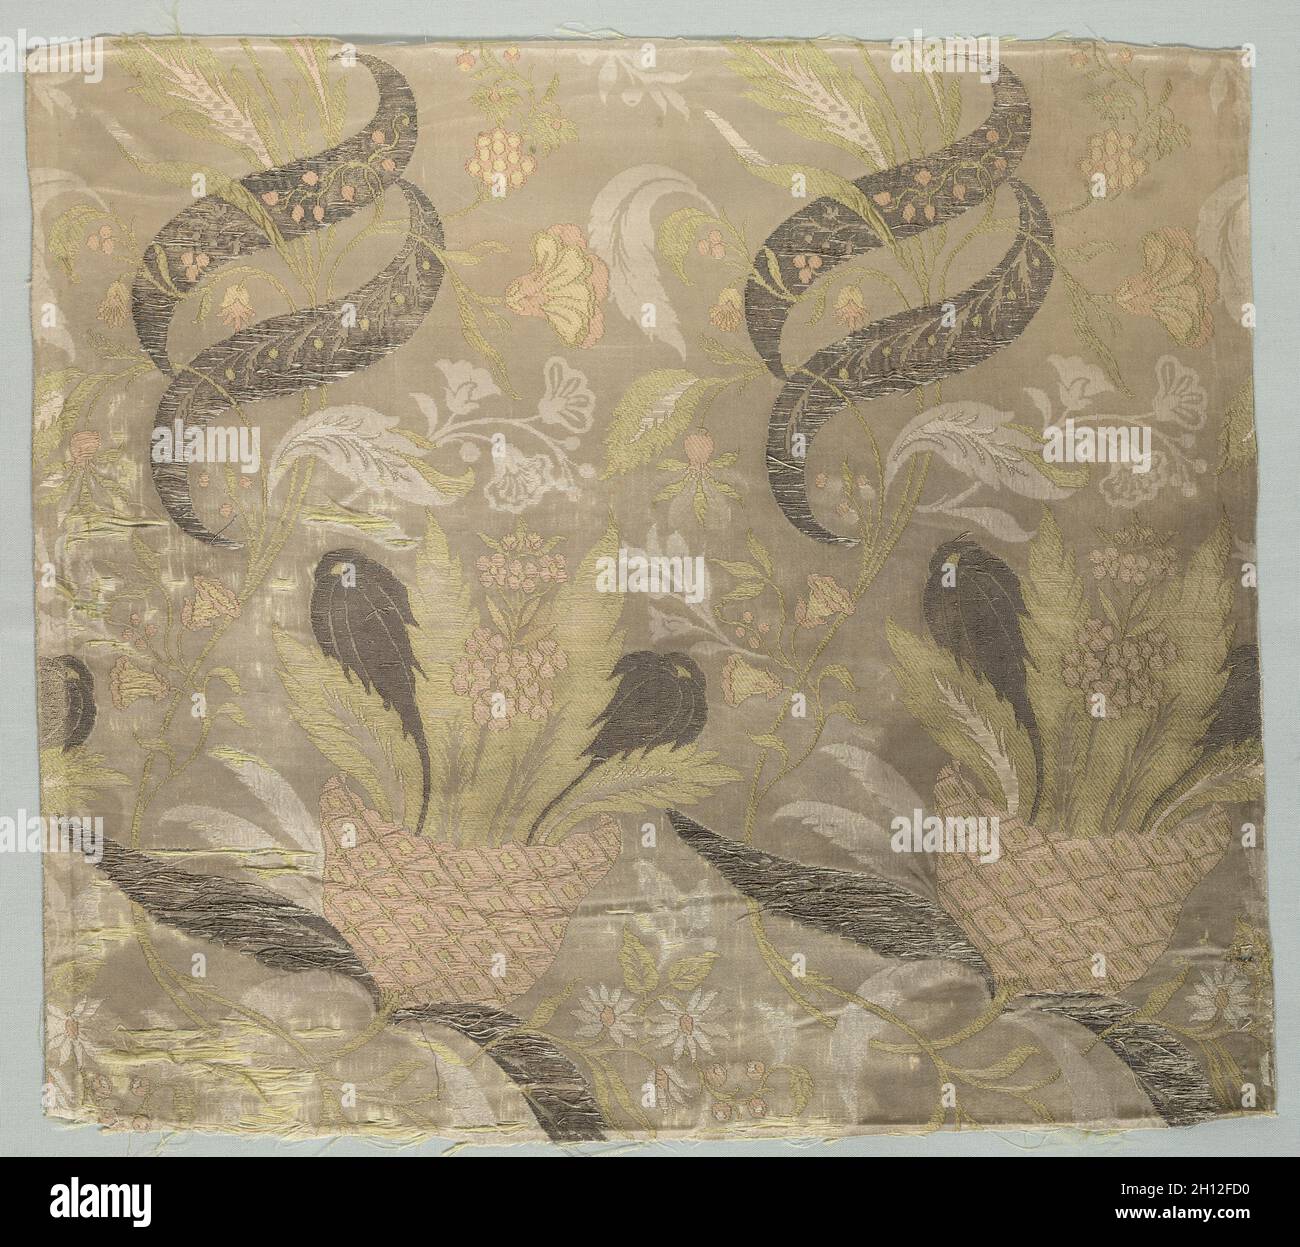 Large Floral Motif, 1830-1899. France, 19th century. Plain compound satin; overall: 47.6 x 53.3 cm (18 3/4 x 21 in.). Stock Photo